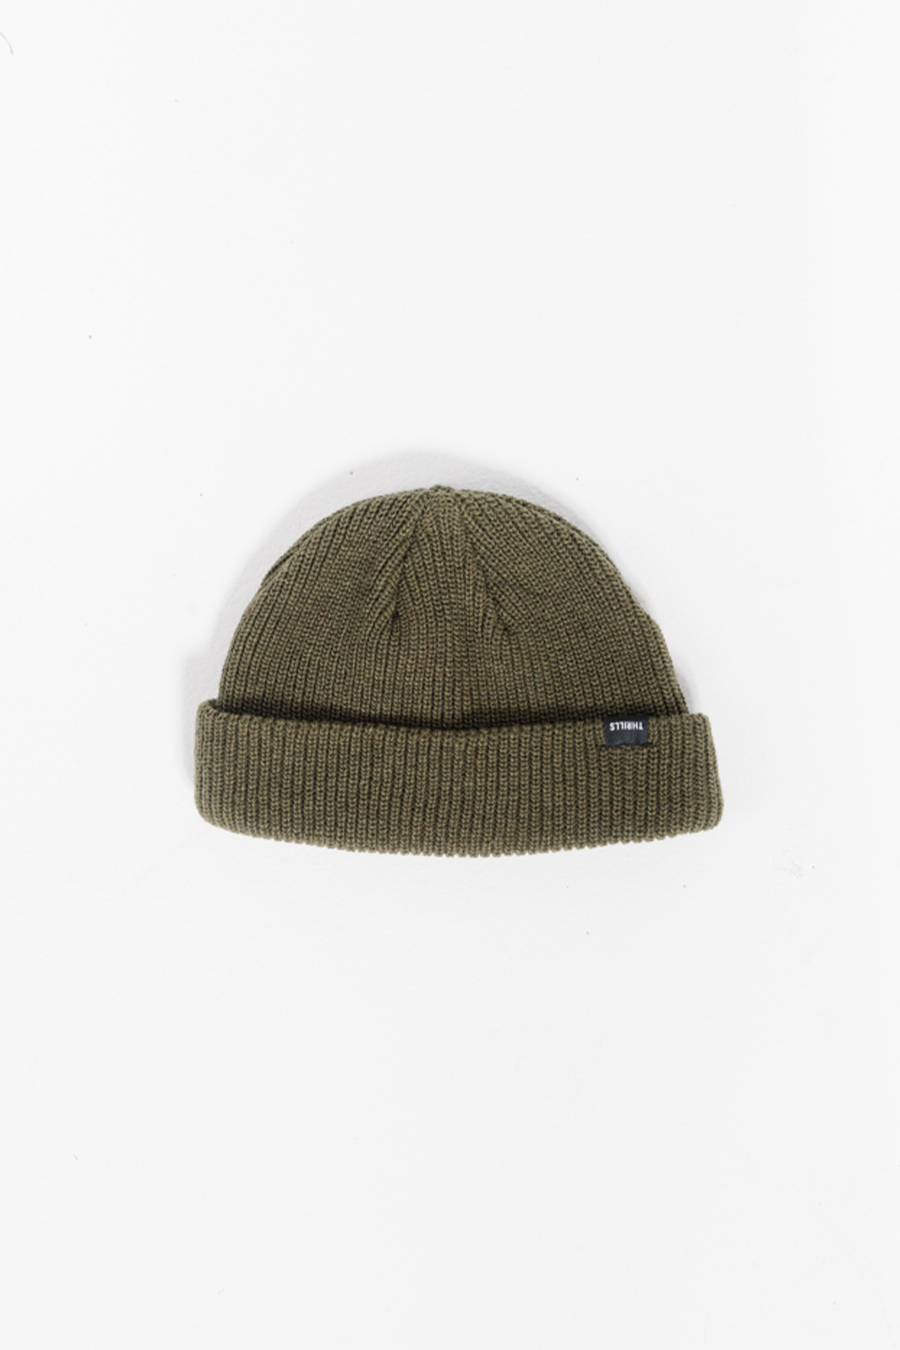 Thrills Classic Beanie | Army Green - Main Image Number 1 of 1